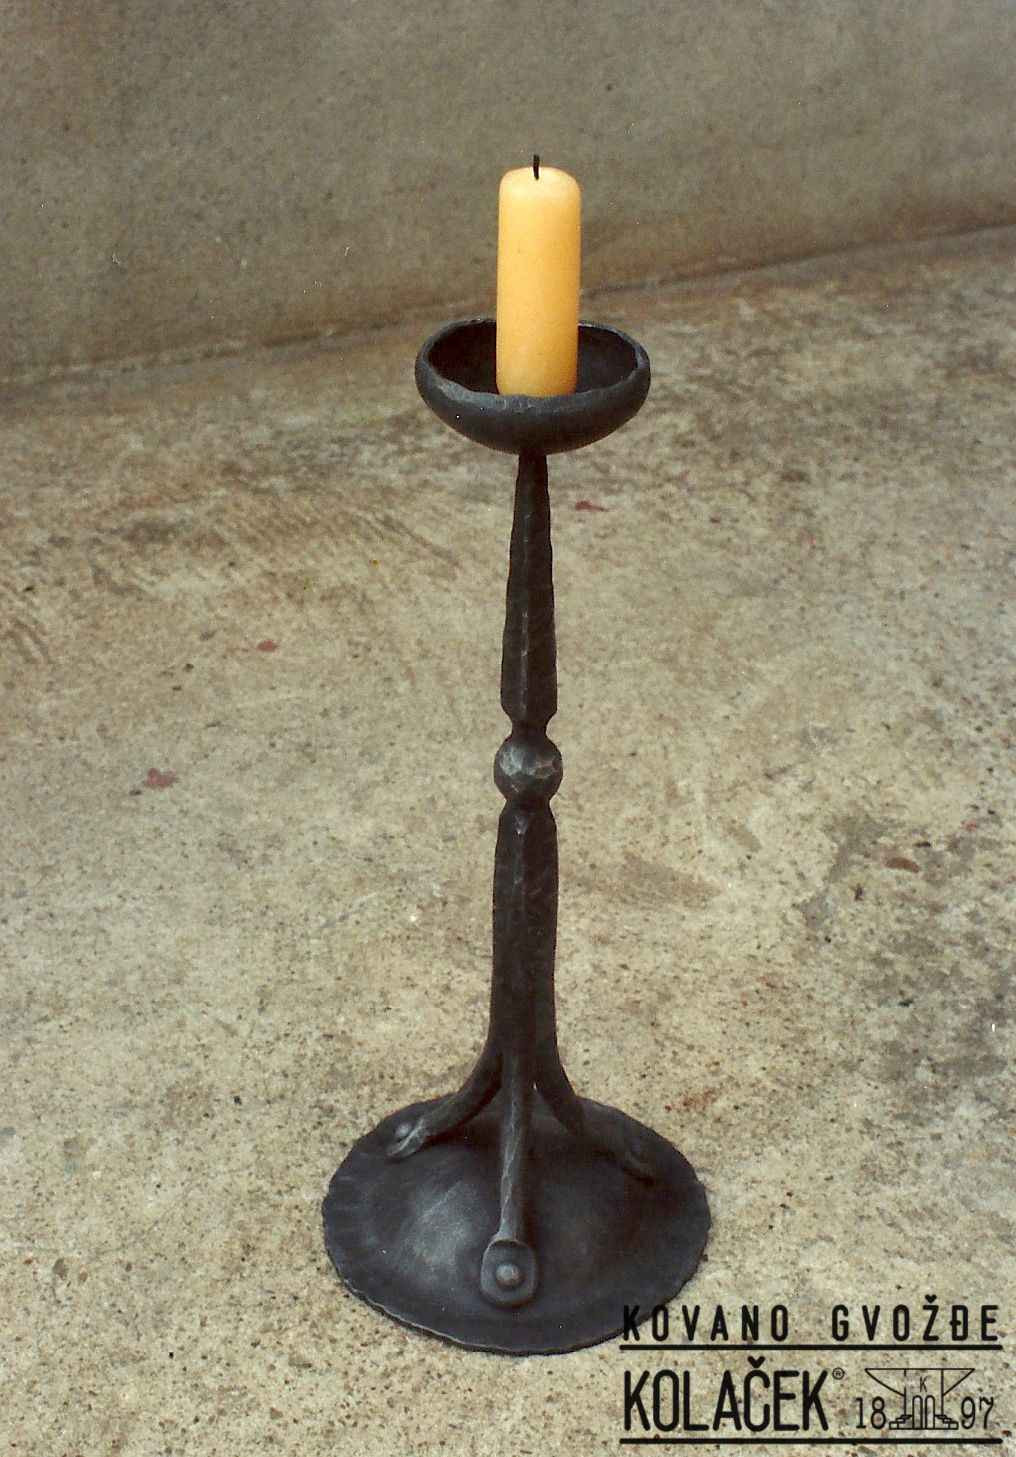 wrought iron vase of black metal candleholder vintage candlestick wrought iron look from with candlestick wrought iron svecnjak od kovanog gvozdja kolacek 1897 from candle stick holder